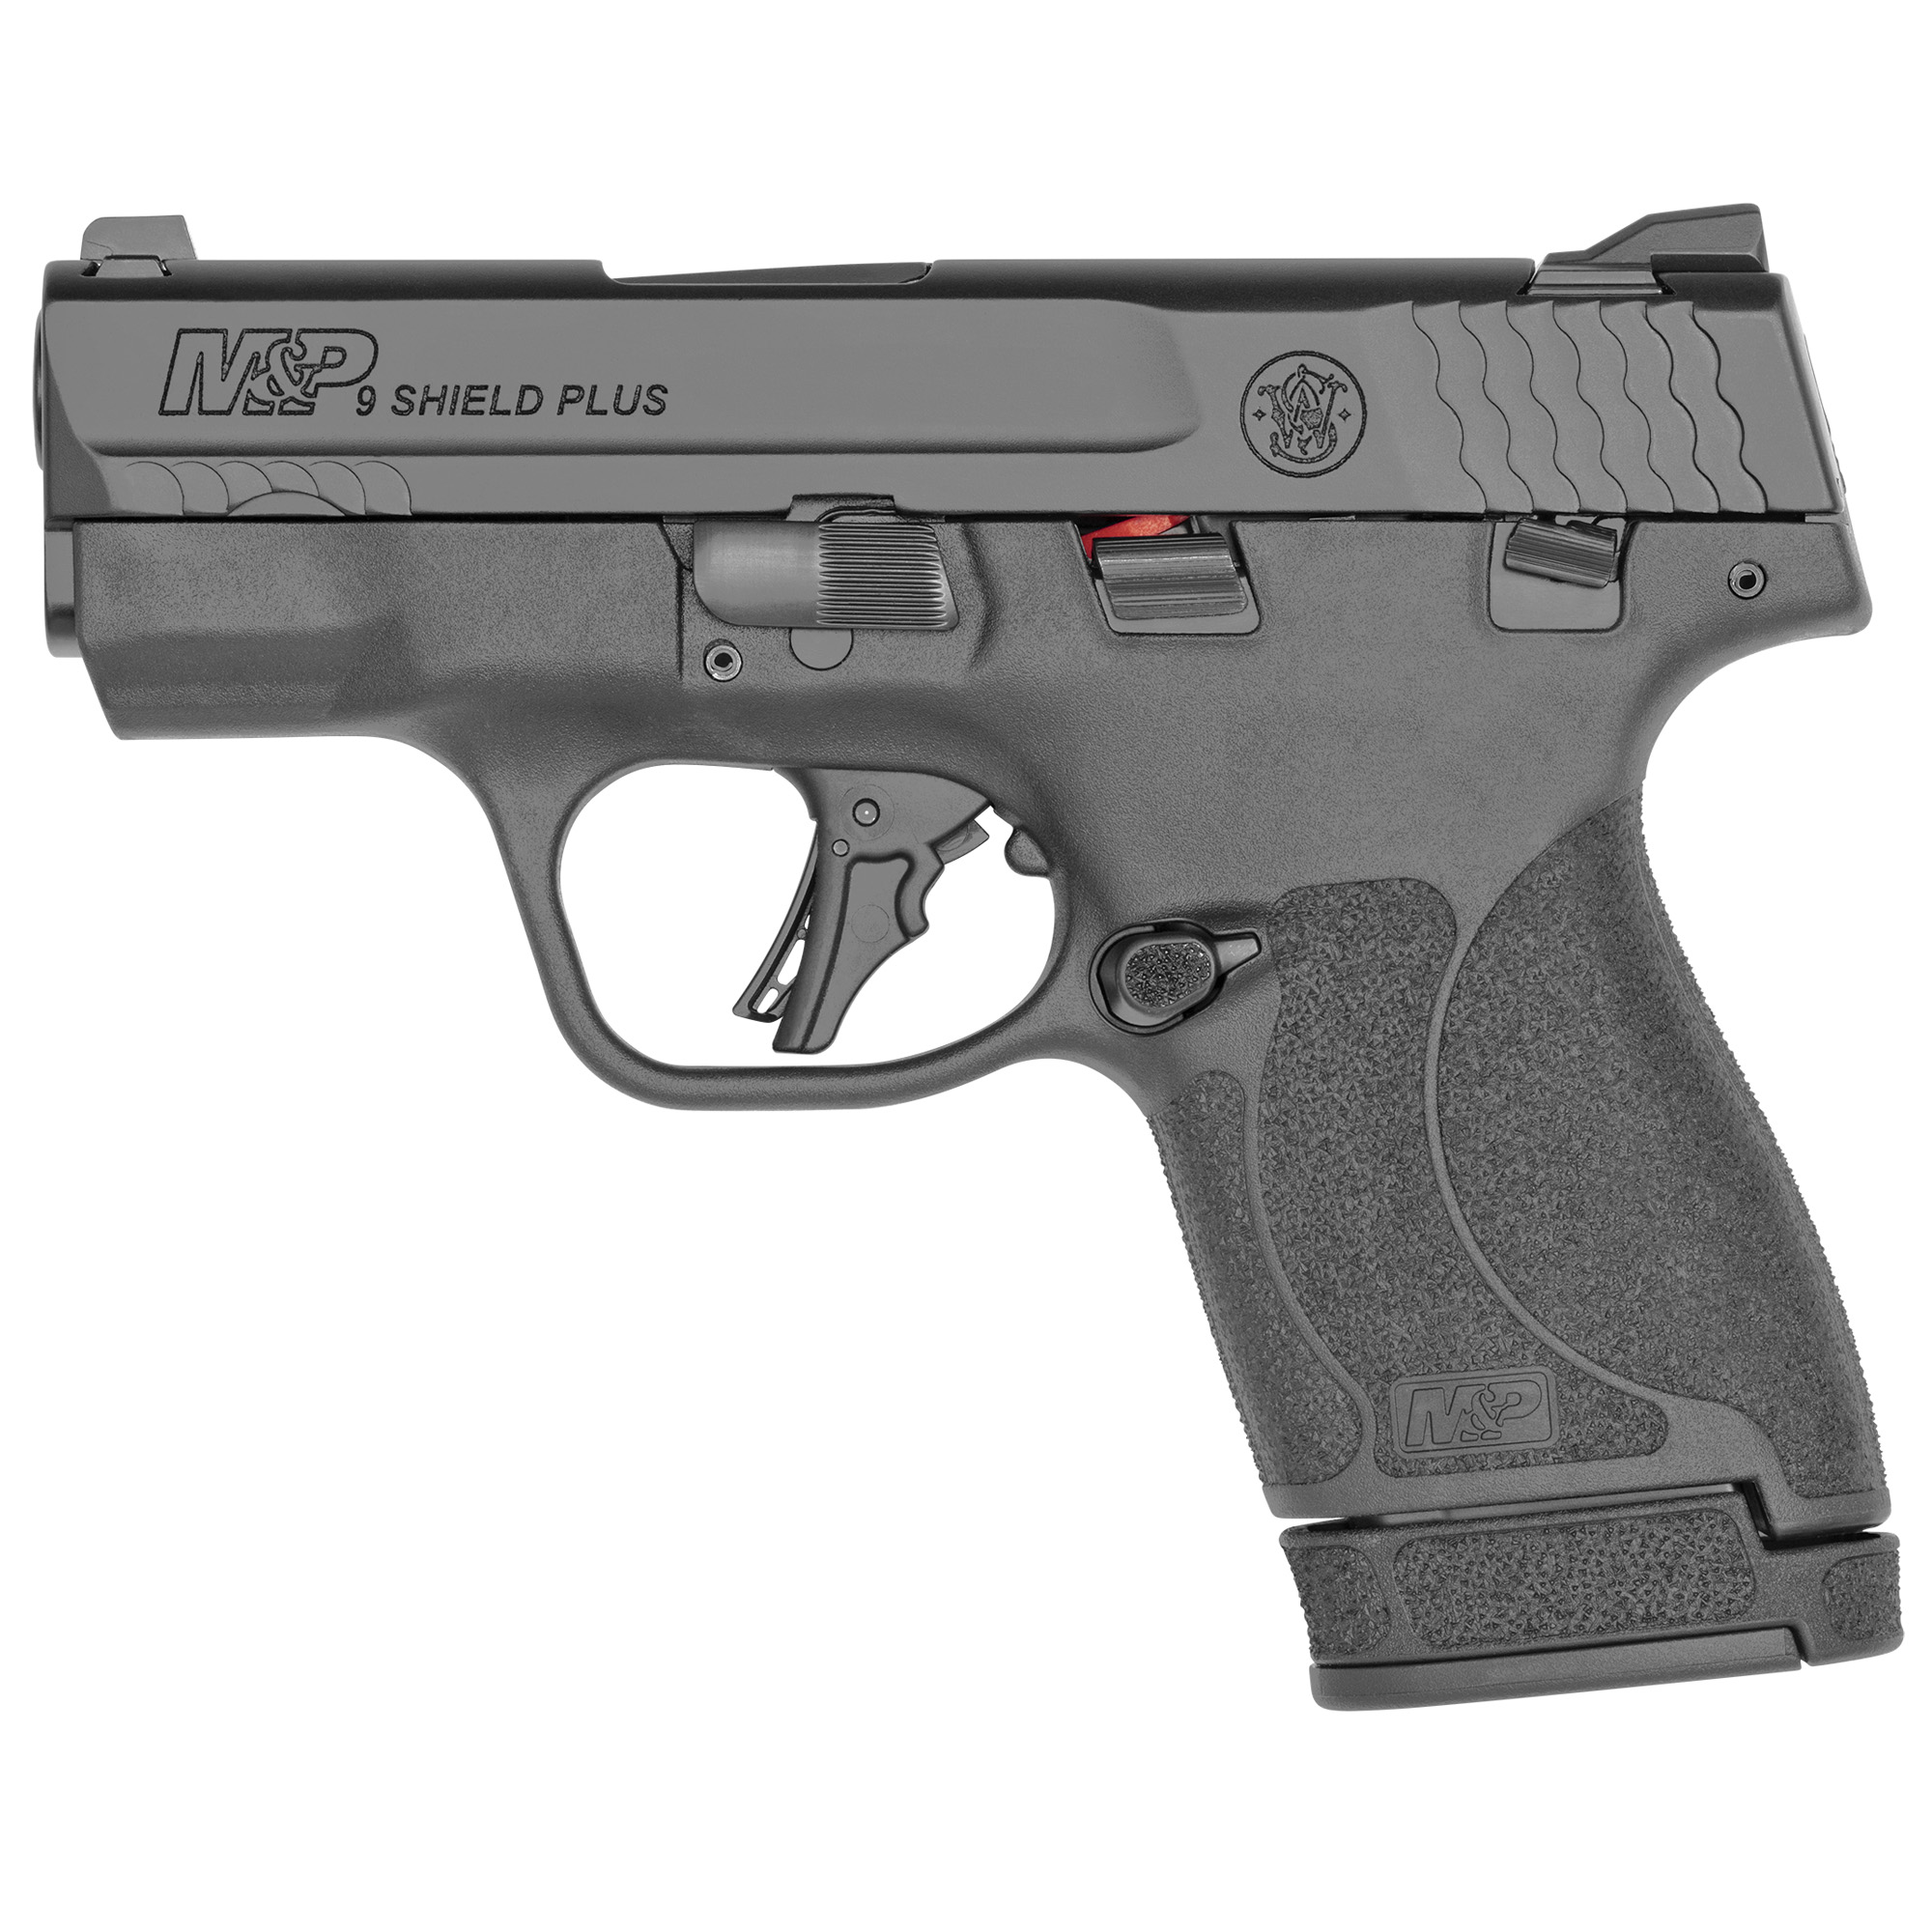 Smith & Wesson, Shield Plus, M&P9, Semi-automatic, Striker Fired Polymer Frame Pistol, Micro-Compact, 9MM, 3.1" Barrel, Armornite Finish, Black, White Dot Sights, Manual Thumb Safety, Flat Face Trigger, 2 Magazines, (1) 10-Round (1) 13-Round